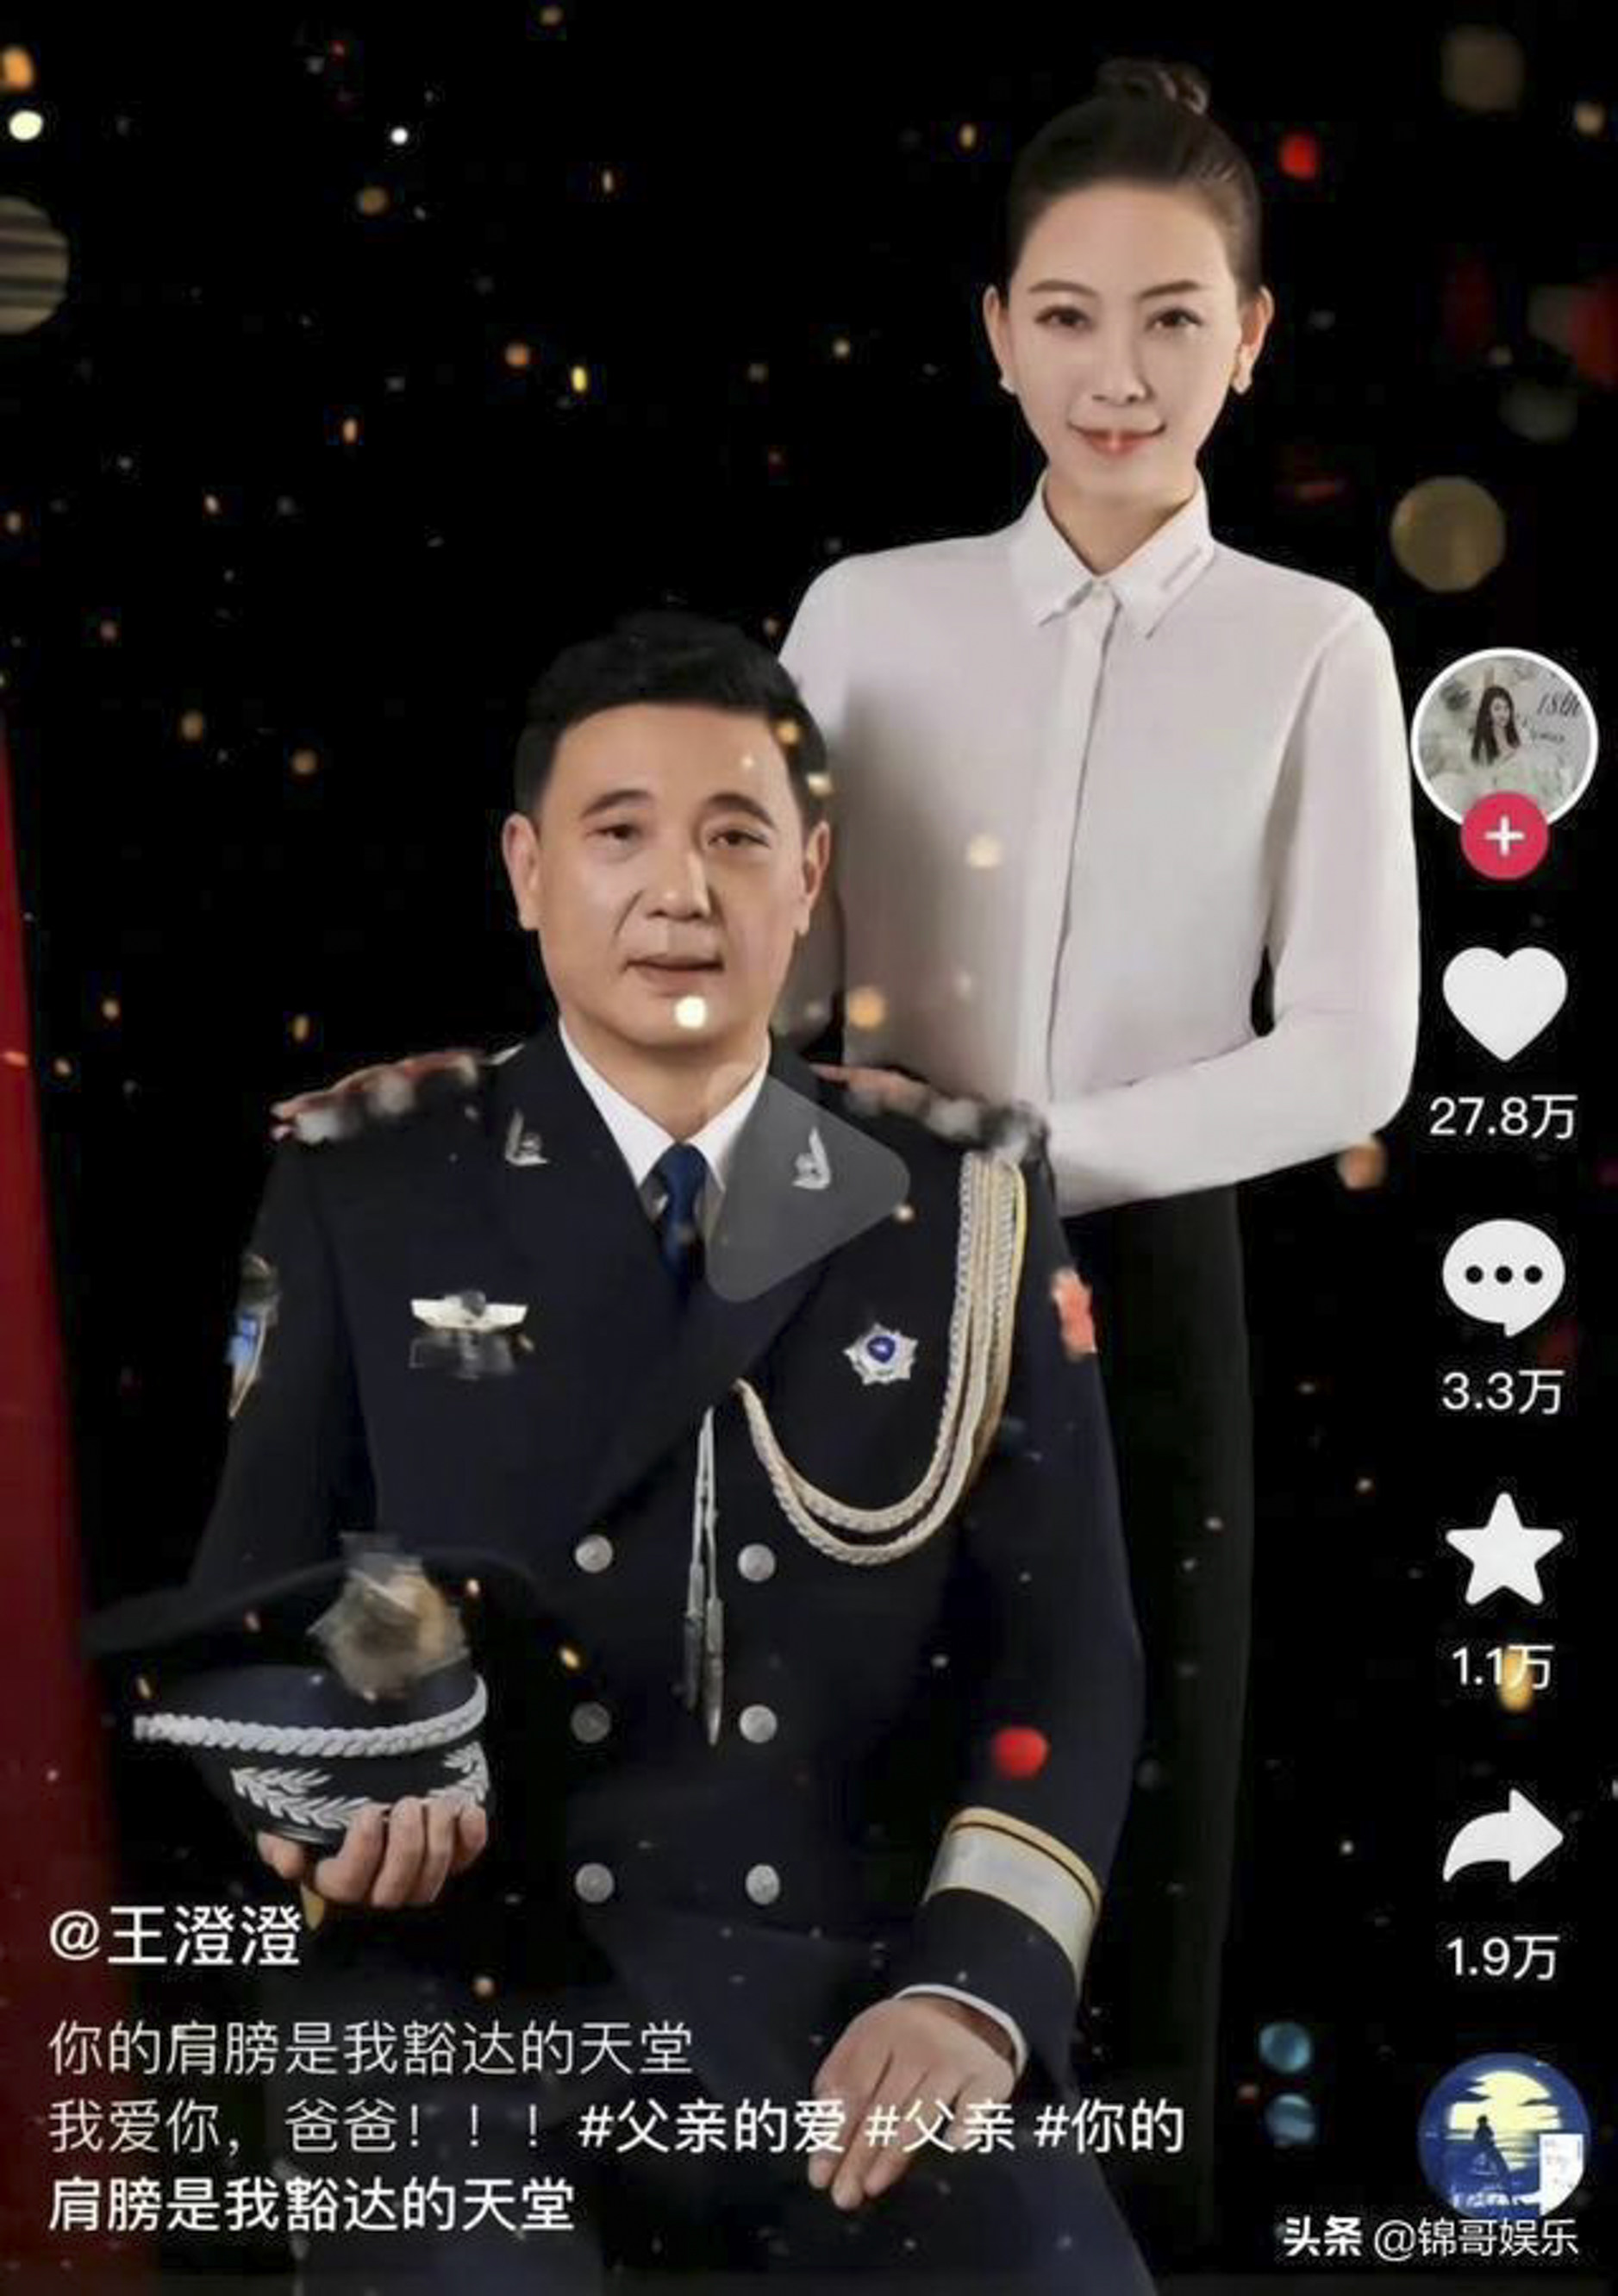 Wang’s boasts about her ‘police officer’ father and photos of her with police helicopters have led to questions about potential misuse of state assets. Photo: Handout